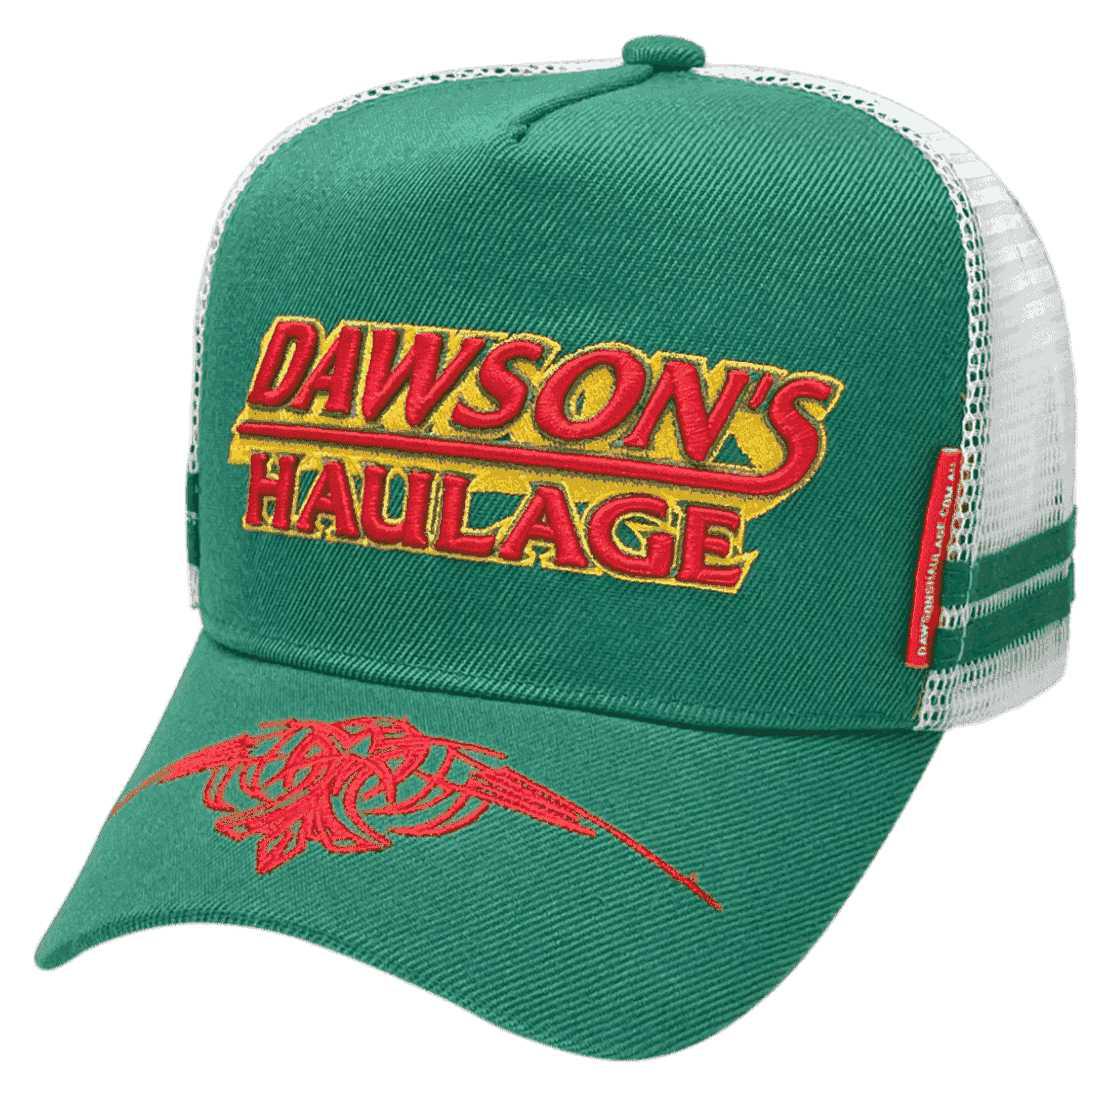 Dawsons Haulage Baranduda Vic HP Power Aussie Trucker Hat with Australian Head Fit Crown and Double Side Bands